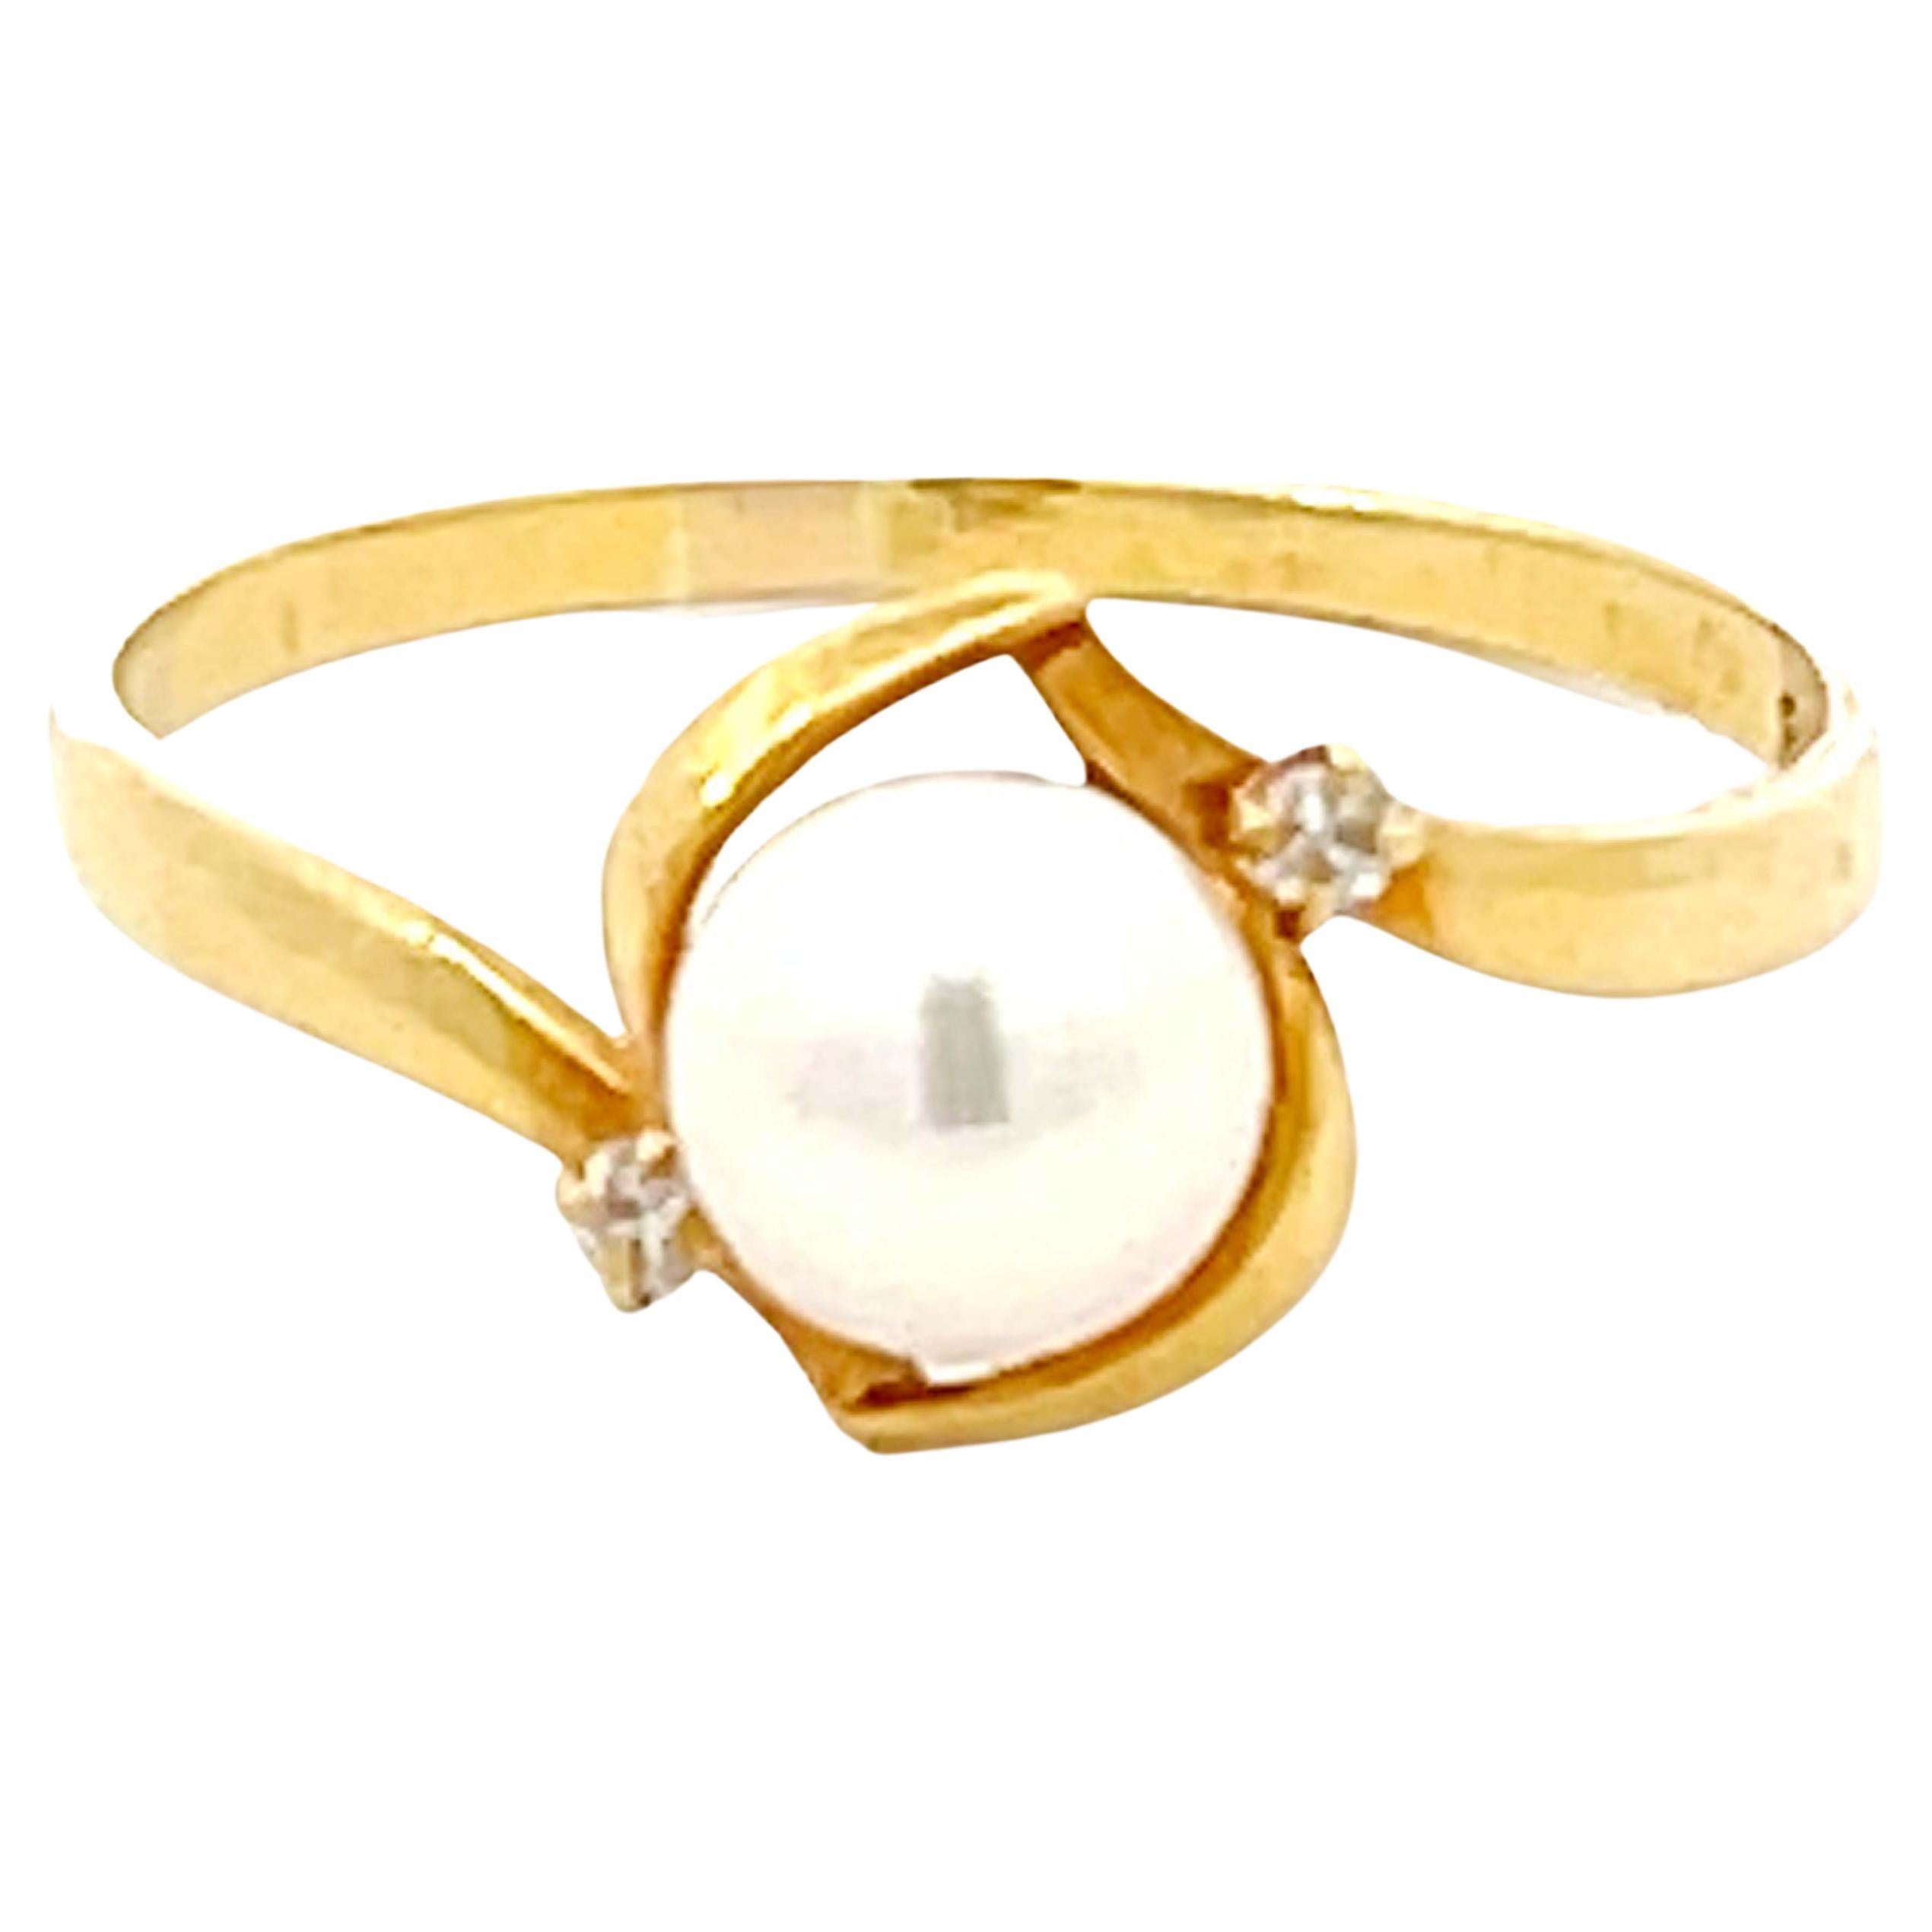 Louis Vuitton LV Volt Upside Down Ring, Yellow Gold Gold. Size 52